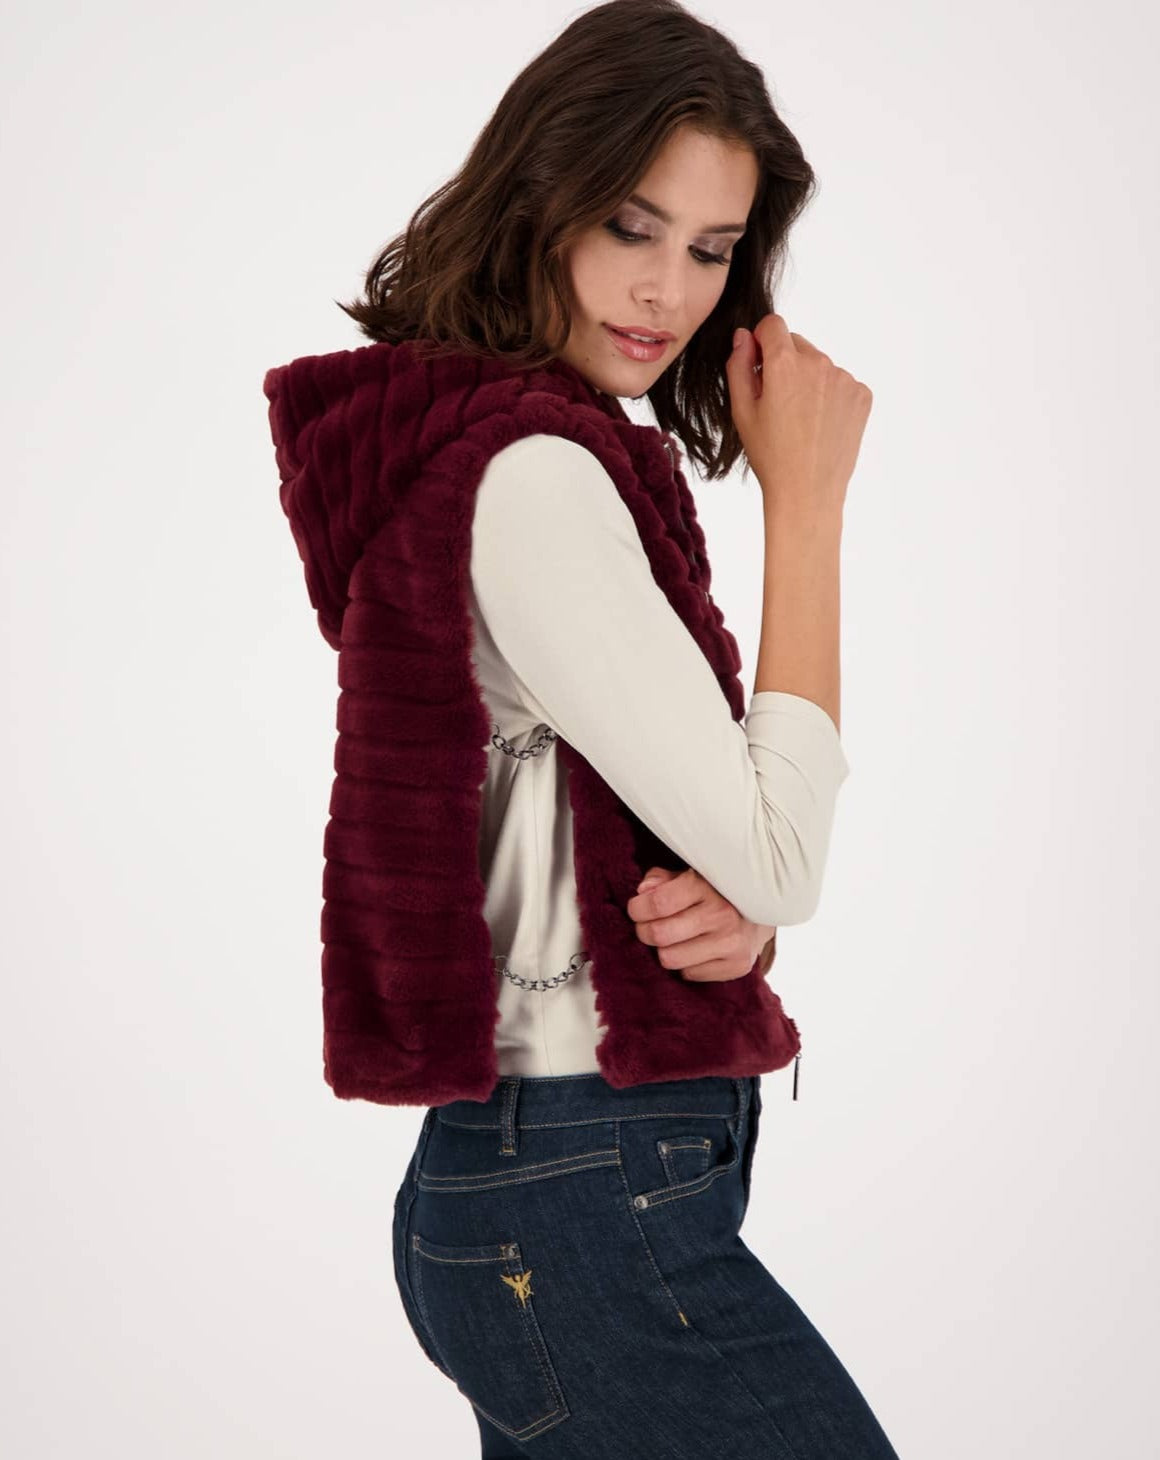 Monari Hooded Vest with Side Chains - Berry Wine